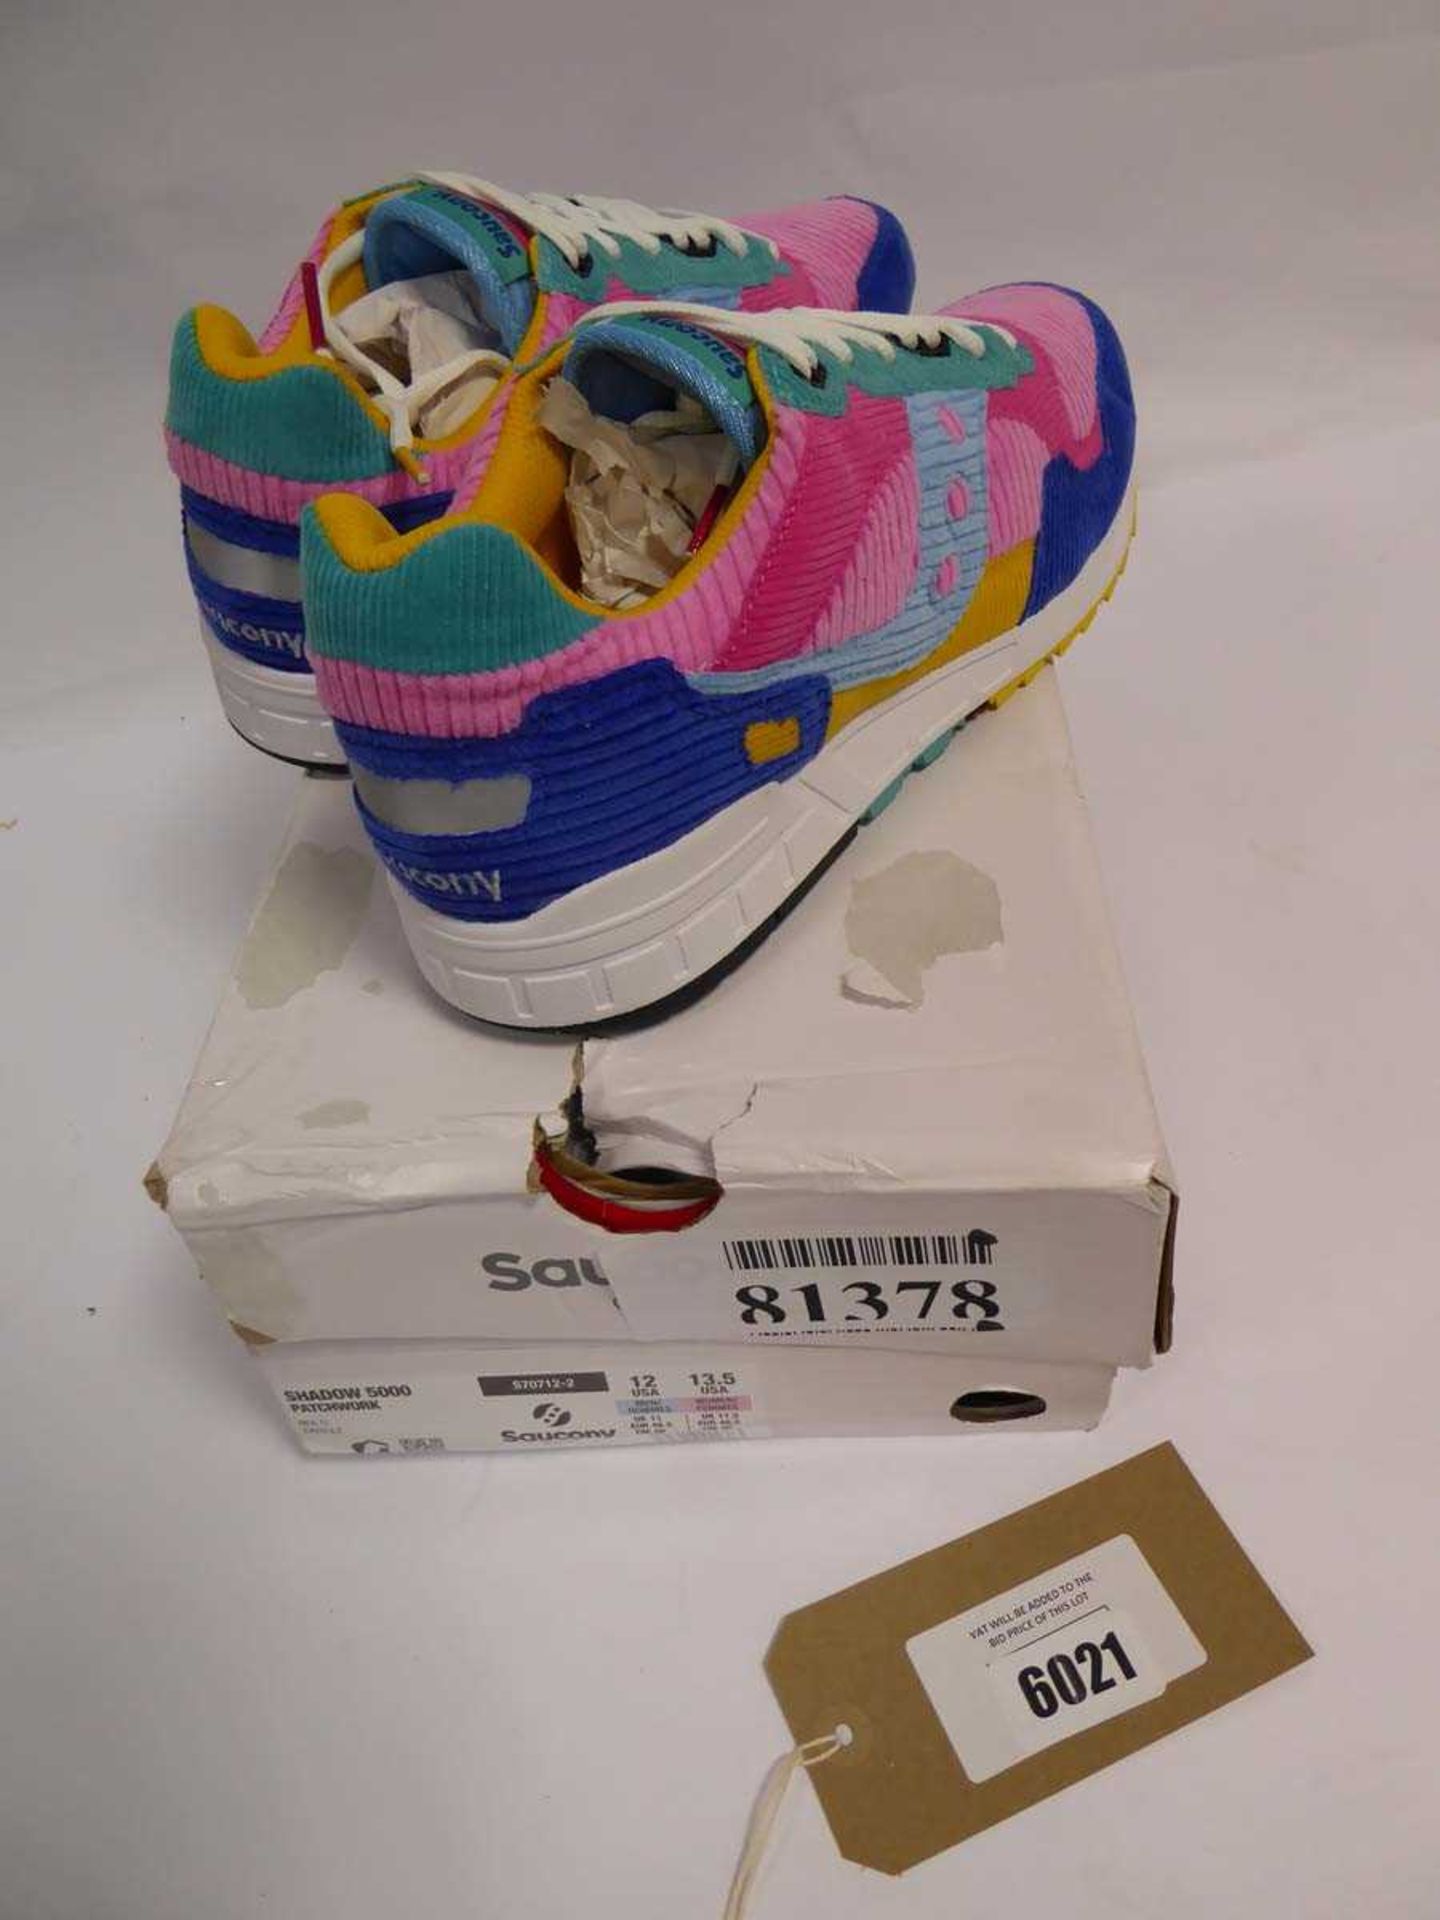 +VAT Boxed pair of Saucony Shadow 5000 patchwork trainers, size 11 (some damage to box) - Image 2 of 3